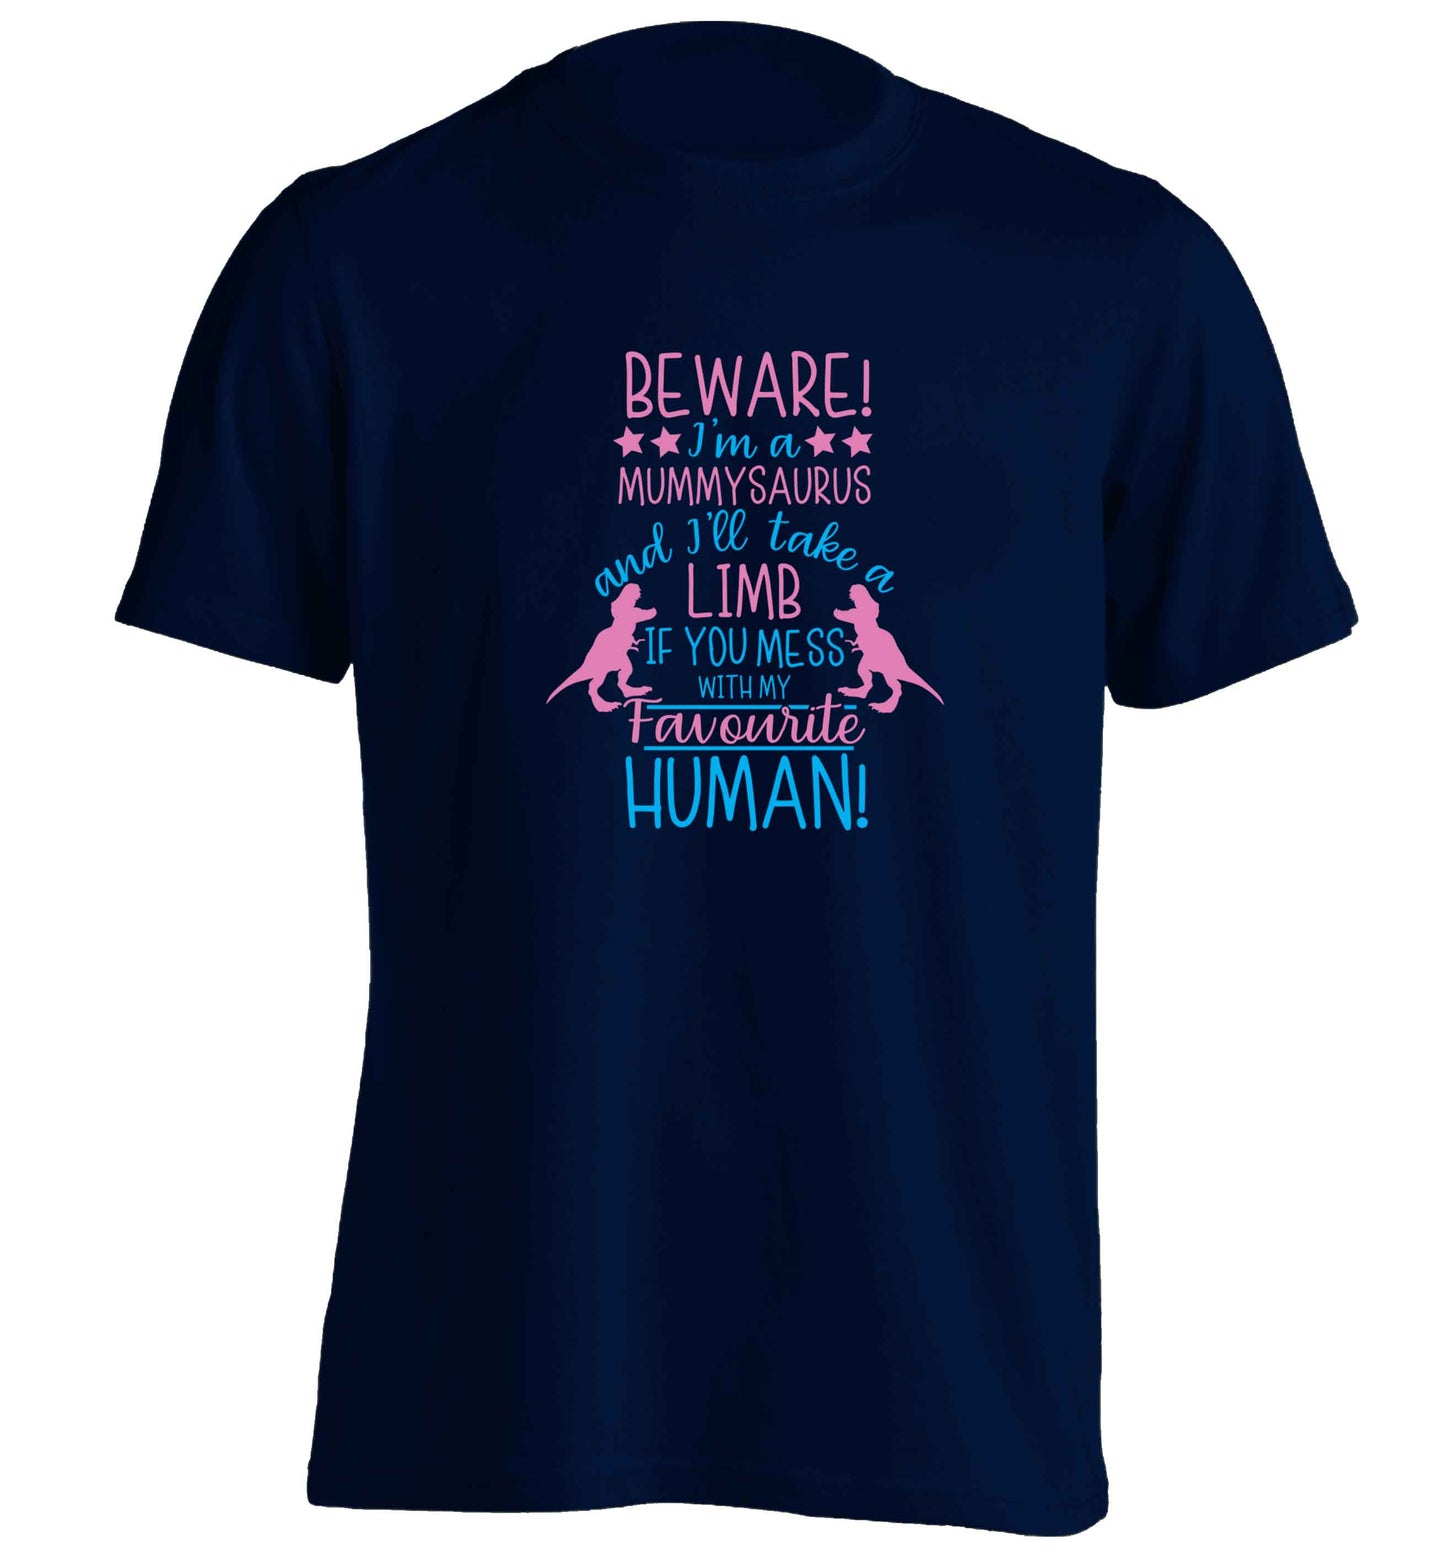 Perfect gift for any protective mummysaurus! Beware I'm a mummysaurus and I'll take a limb if you mess with my favourite human adults unisex navy Tshirt 2XL